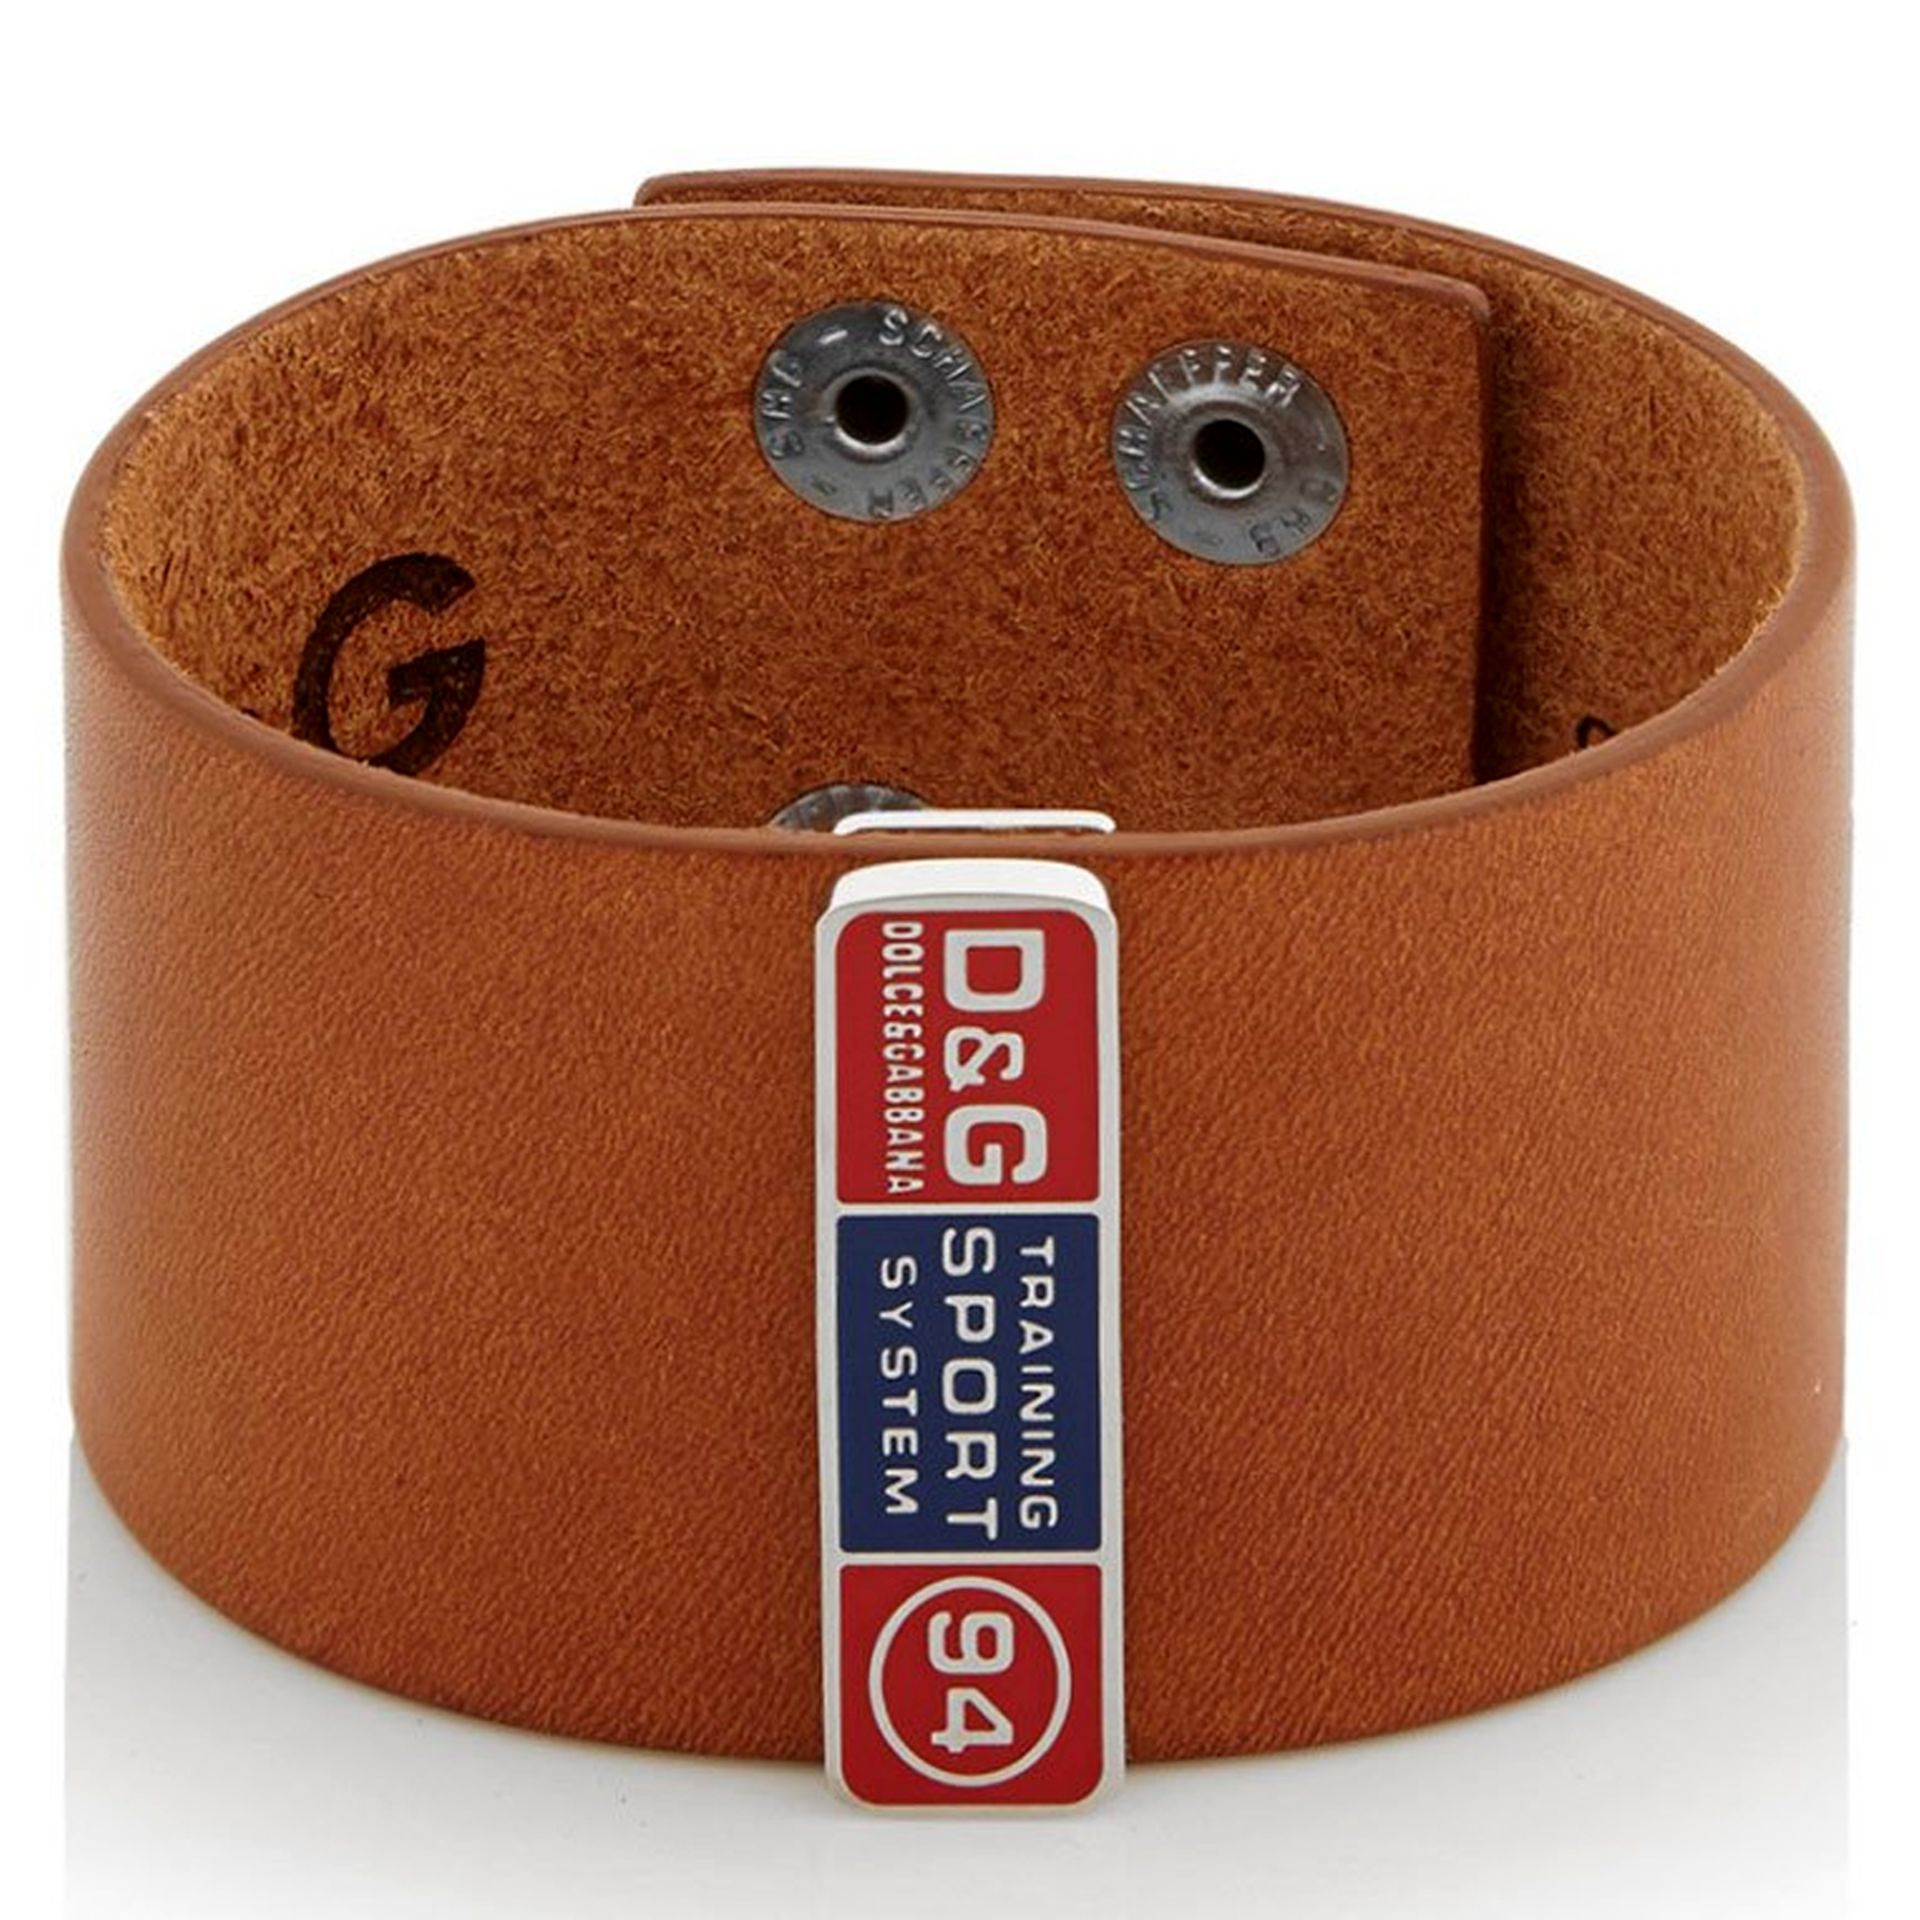 D&G wristband made from dark brown leather.- RRP £89 - Brand New & Boxed